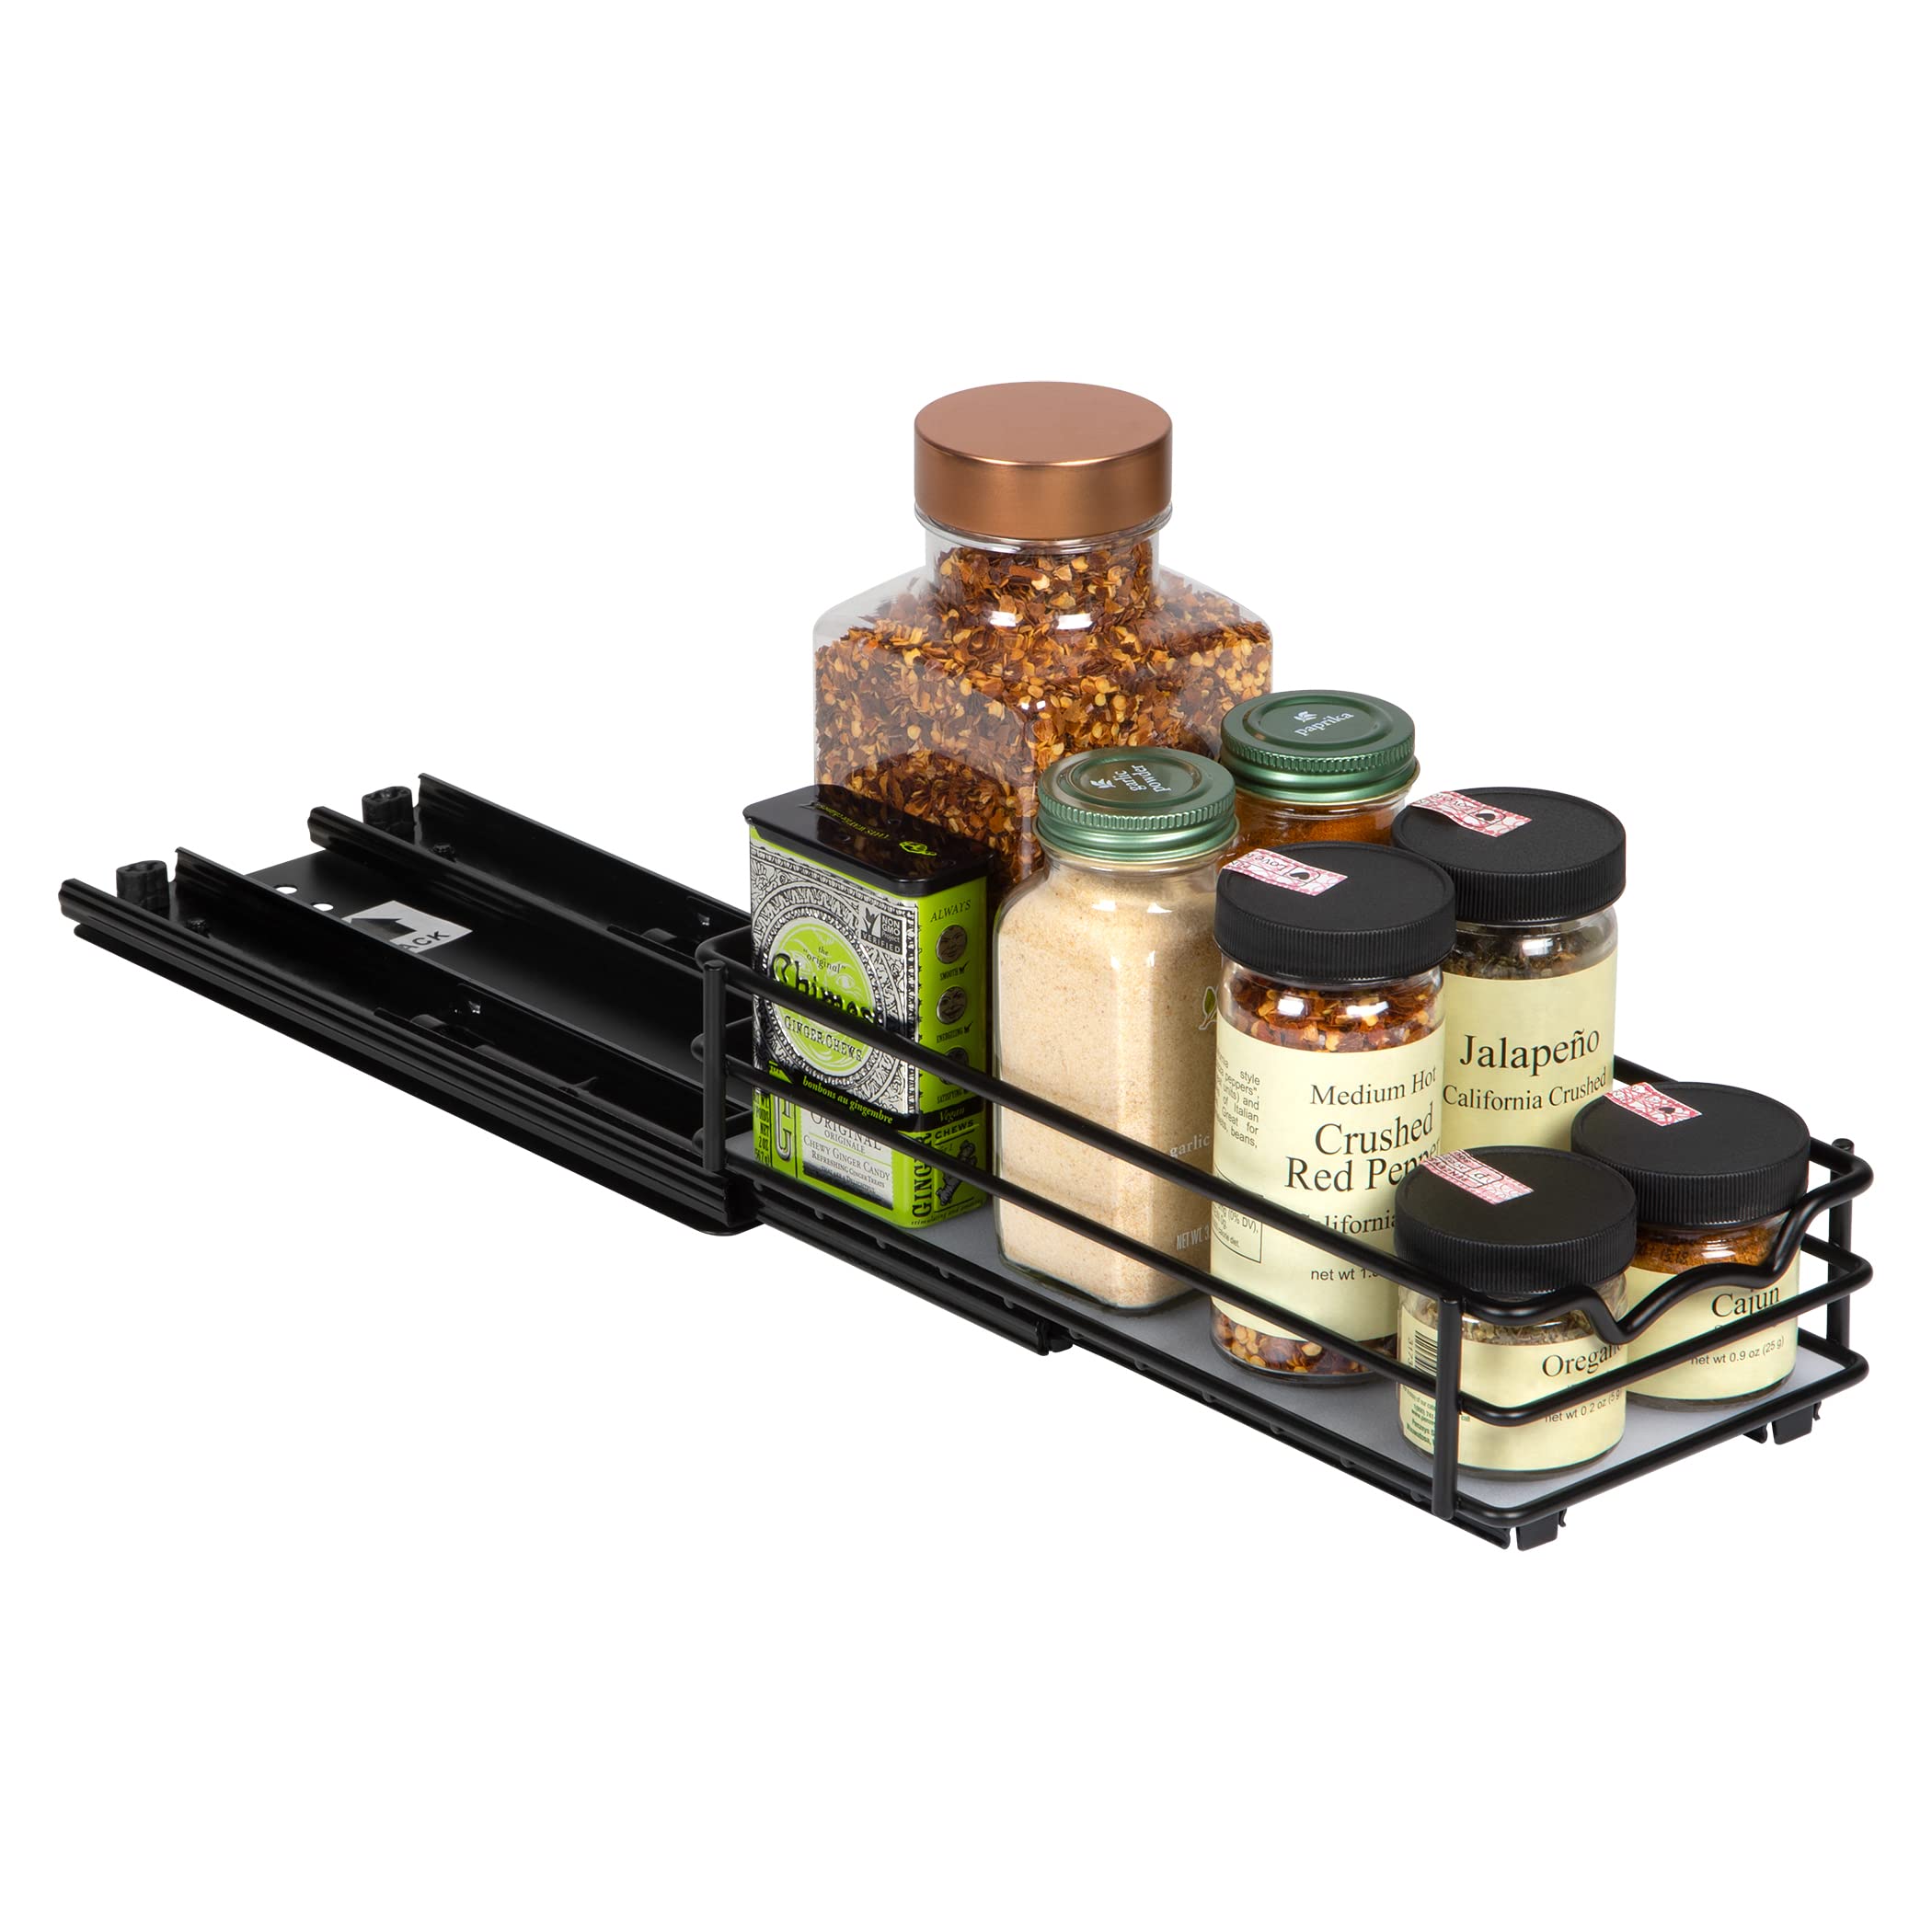 HOLDN’ STORAGE Pull Out Spice Rack Organizer for Cabinet, Heavy Duty-5 Year Limited Warranty- Slide Out Double Rack Tier-Fits Spices, Sauces, Cans etc  - Like New